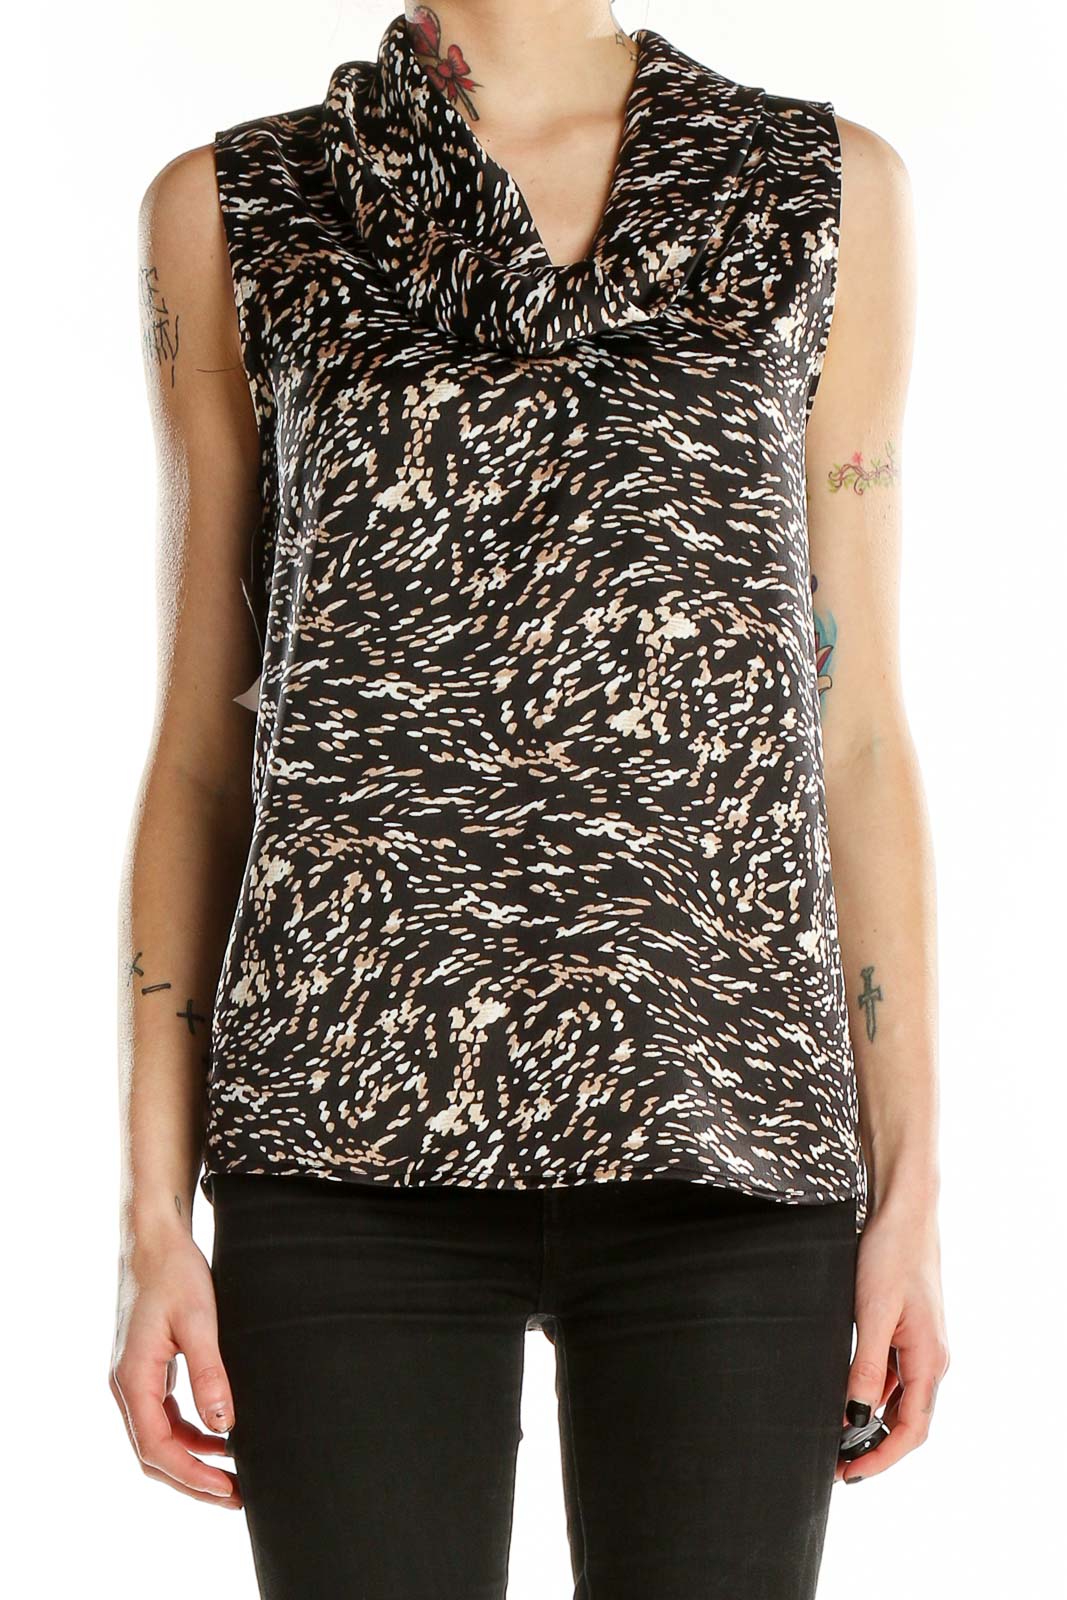 Black Cowl Neck Sleeveless Printed Blouse Front